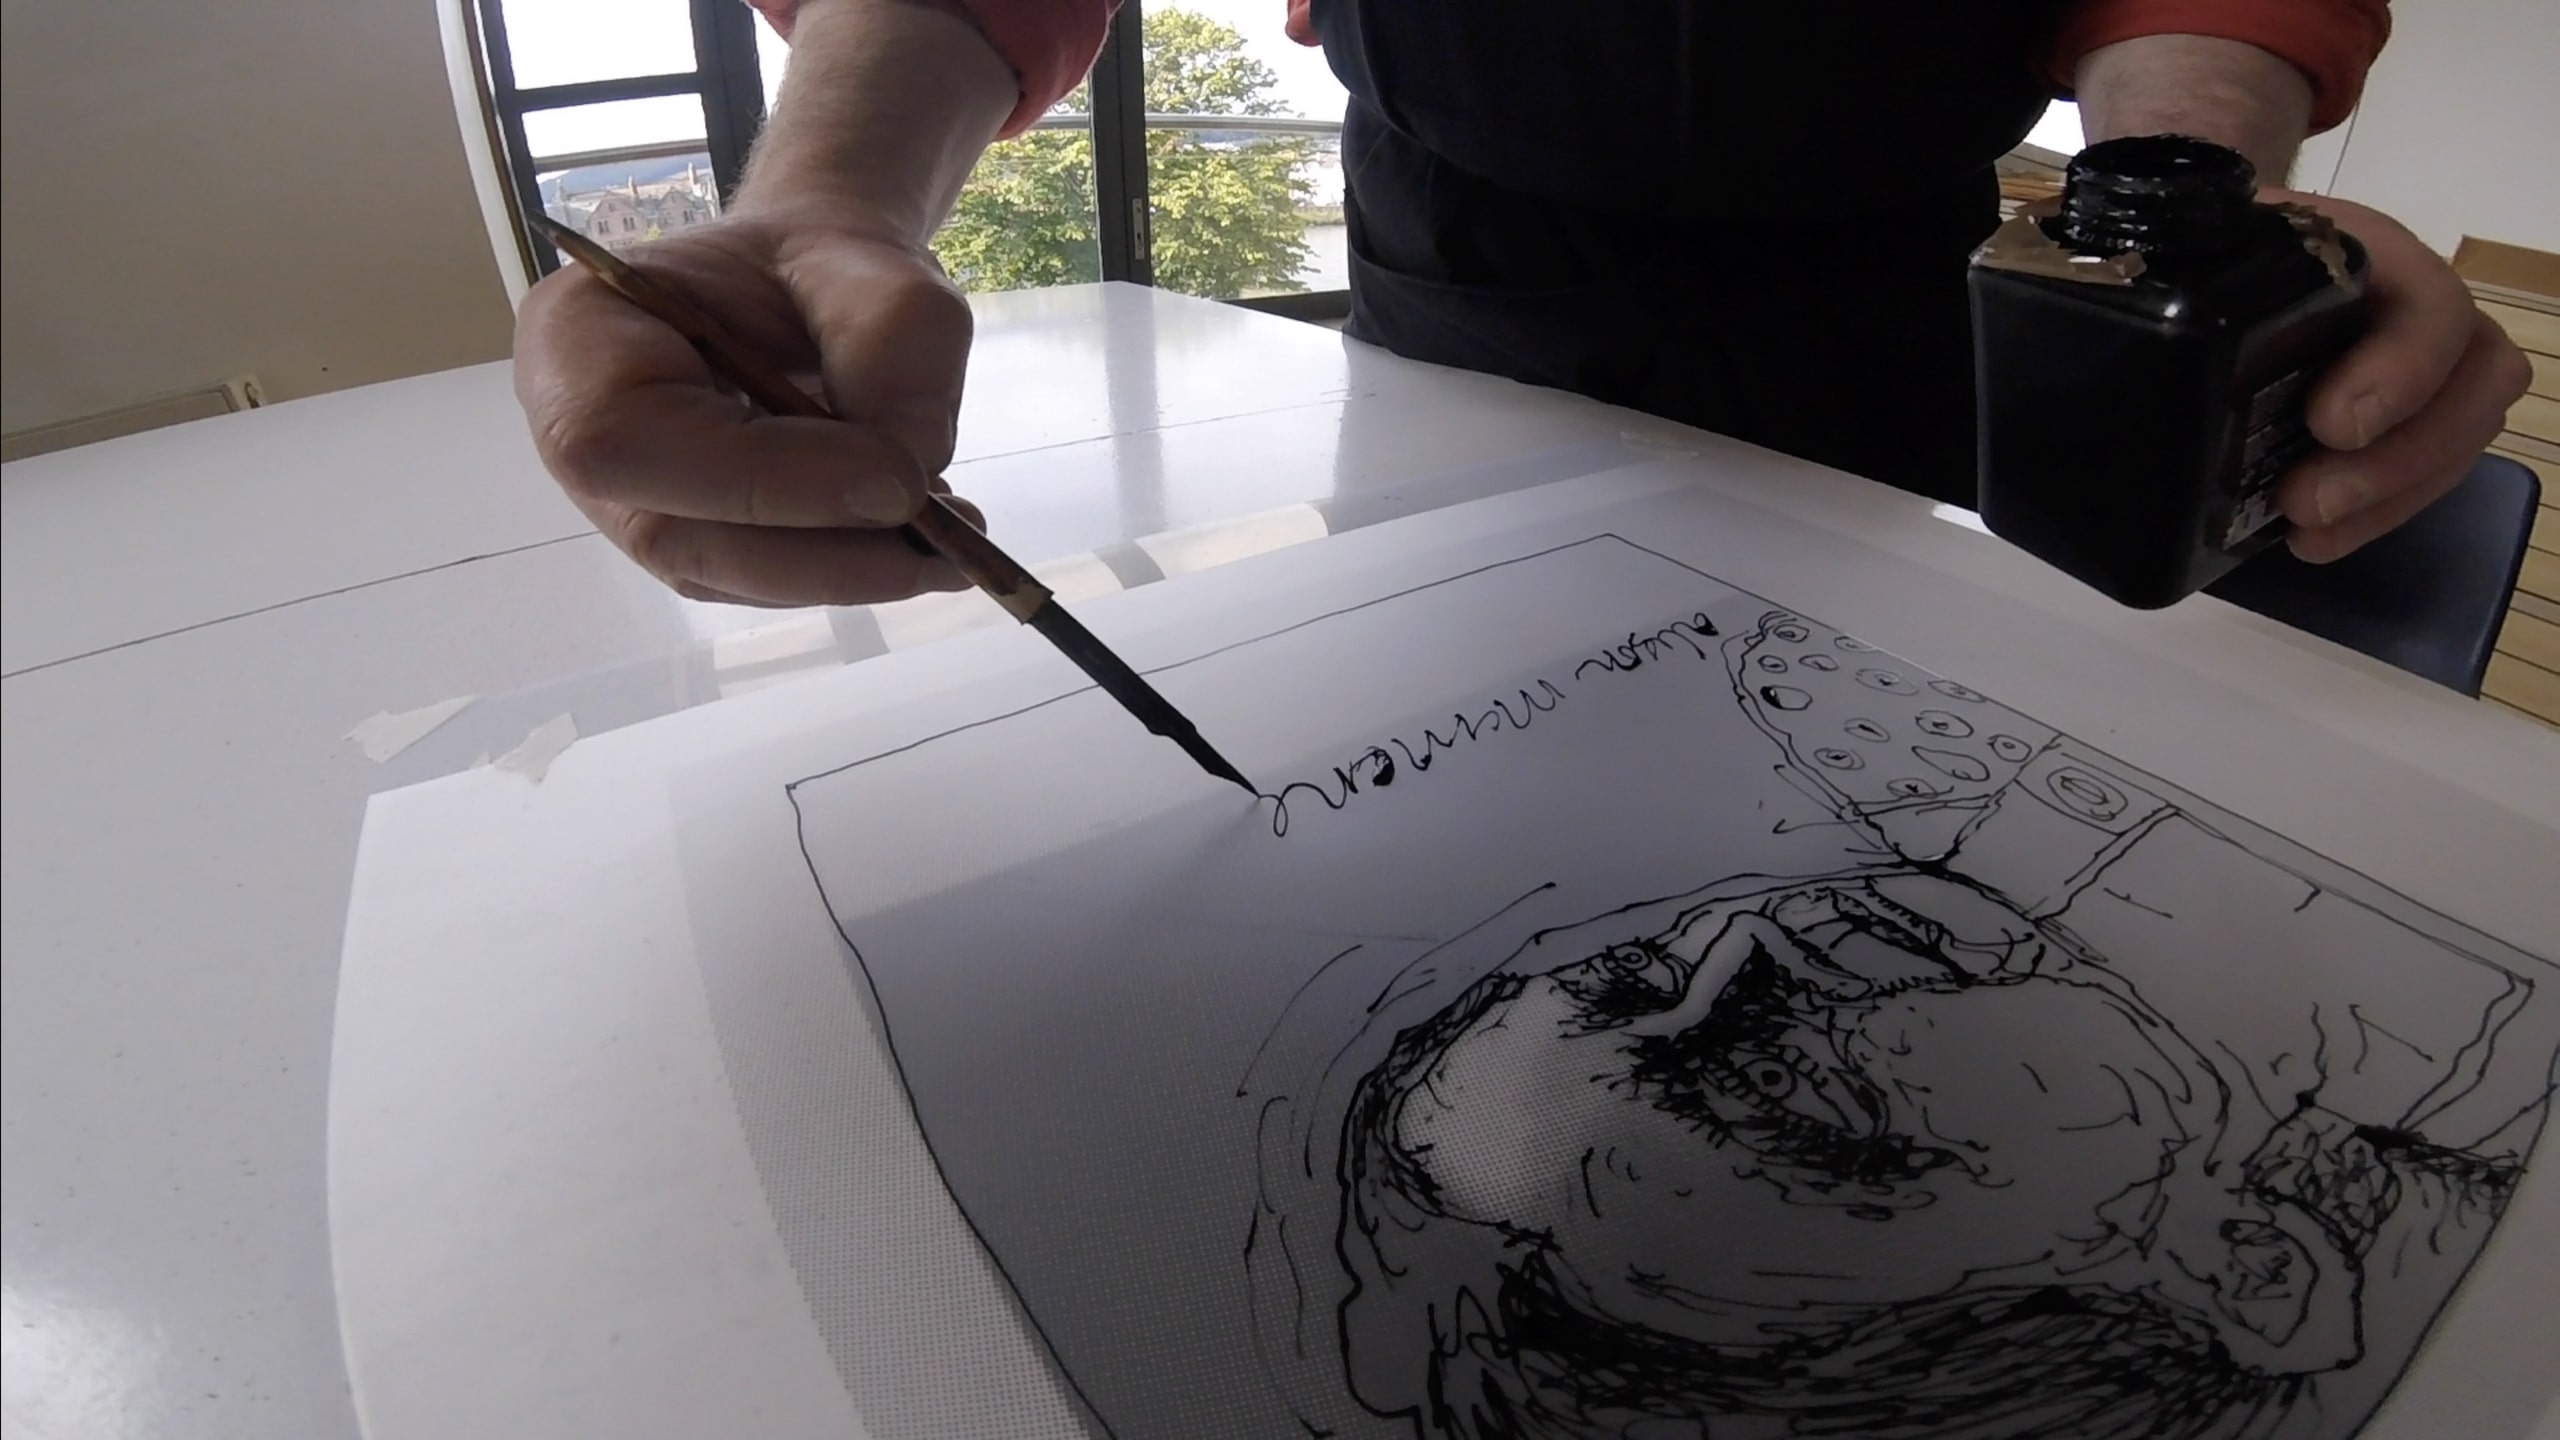 A man writing with a fountain pen on an illustration of a man's head